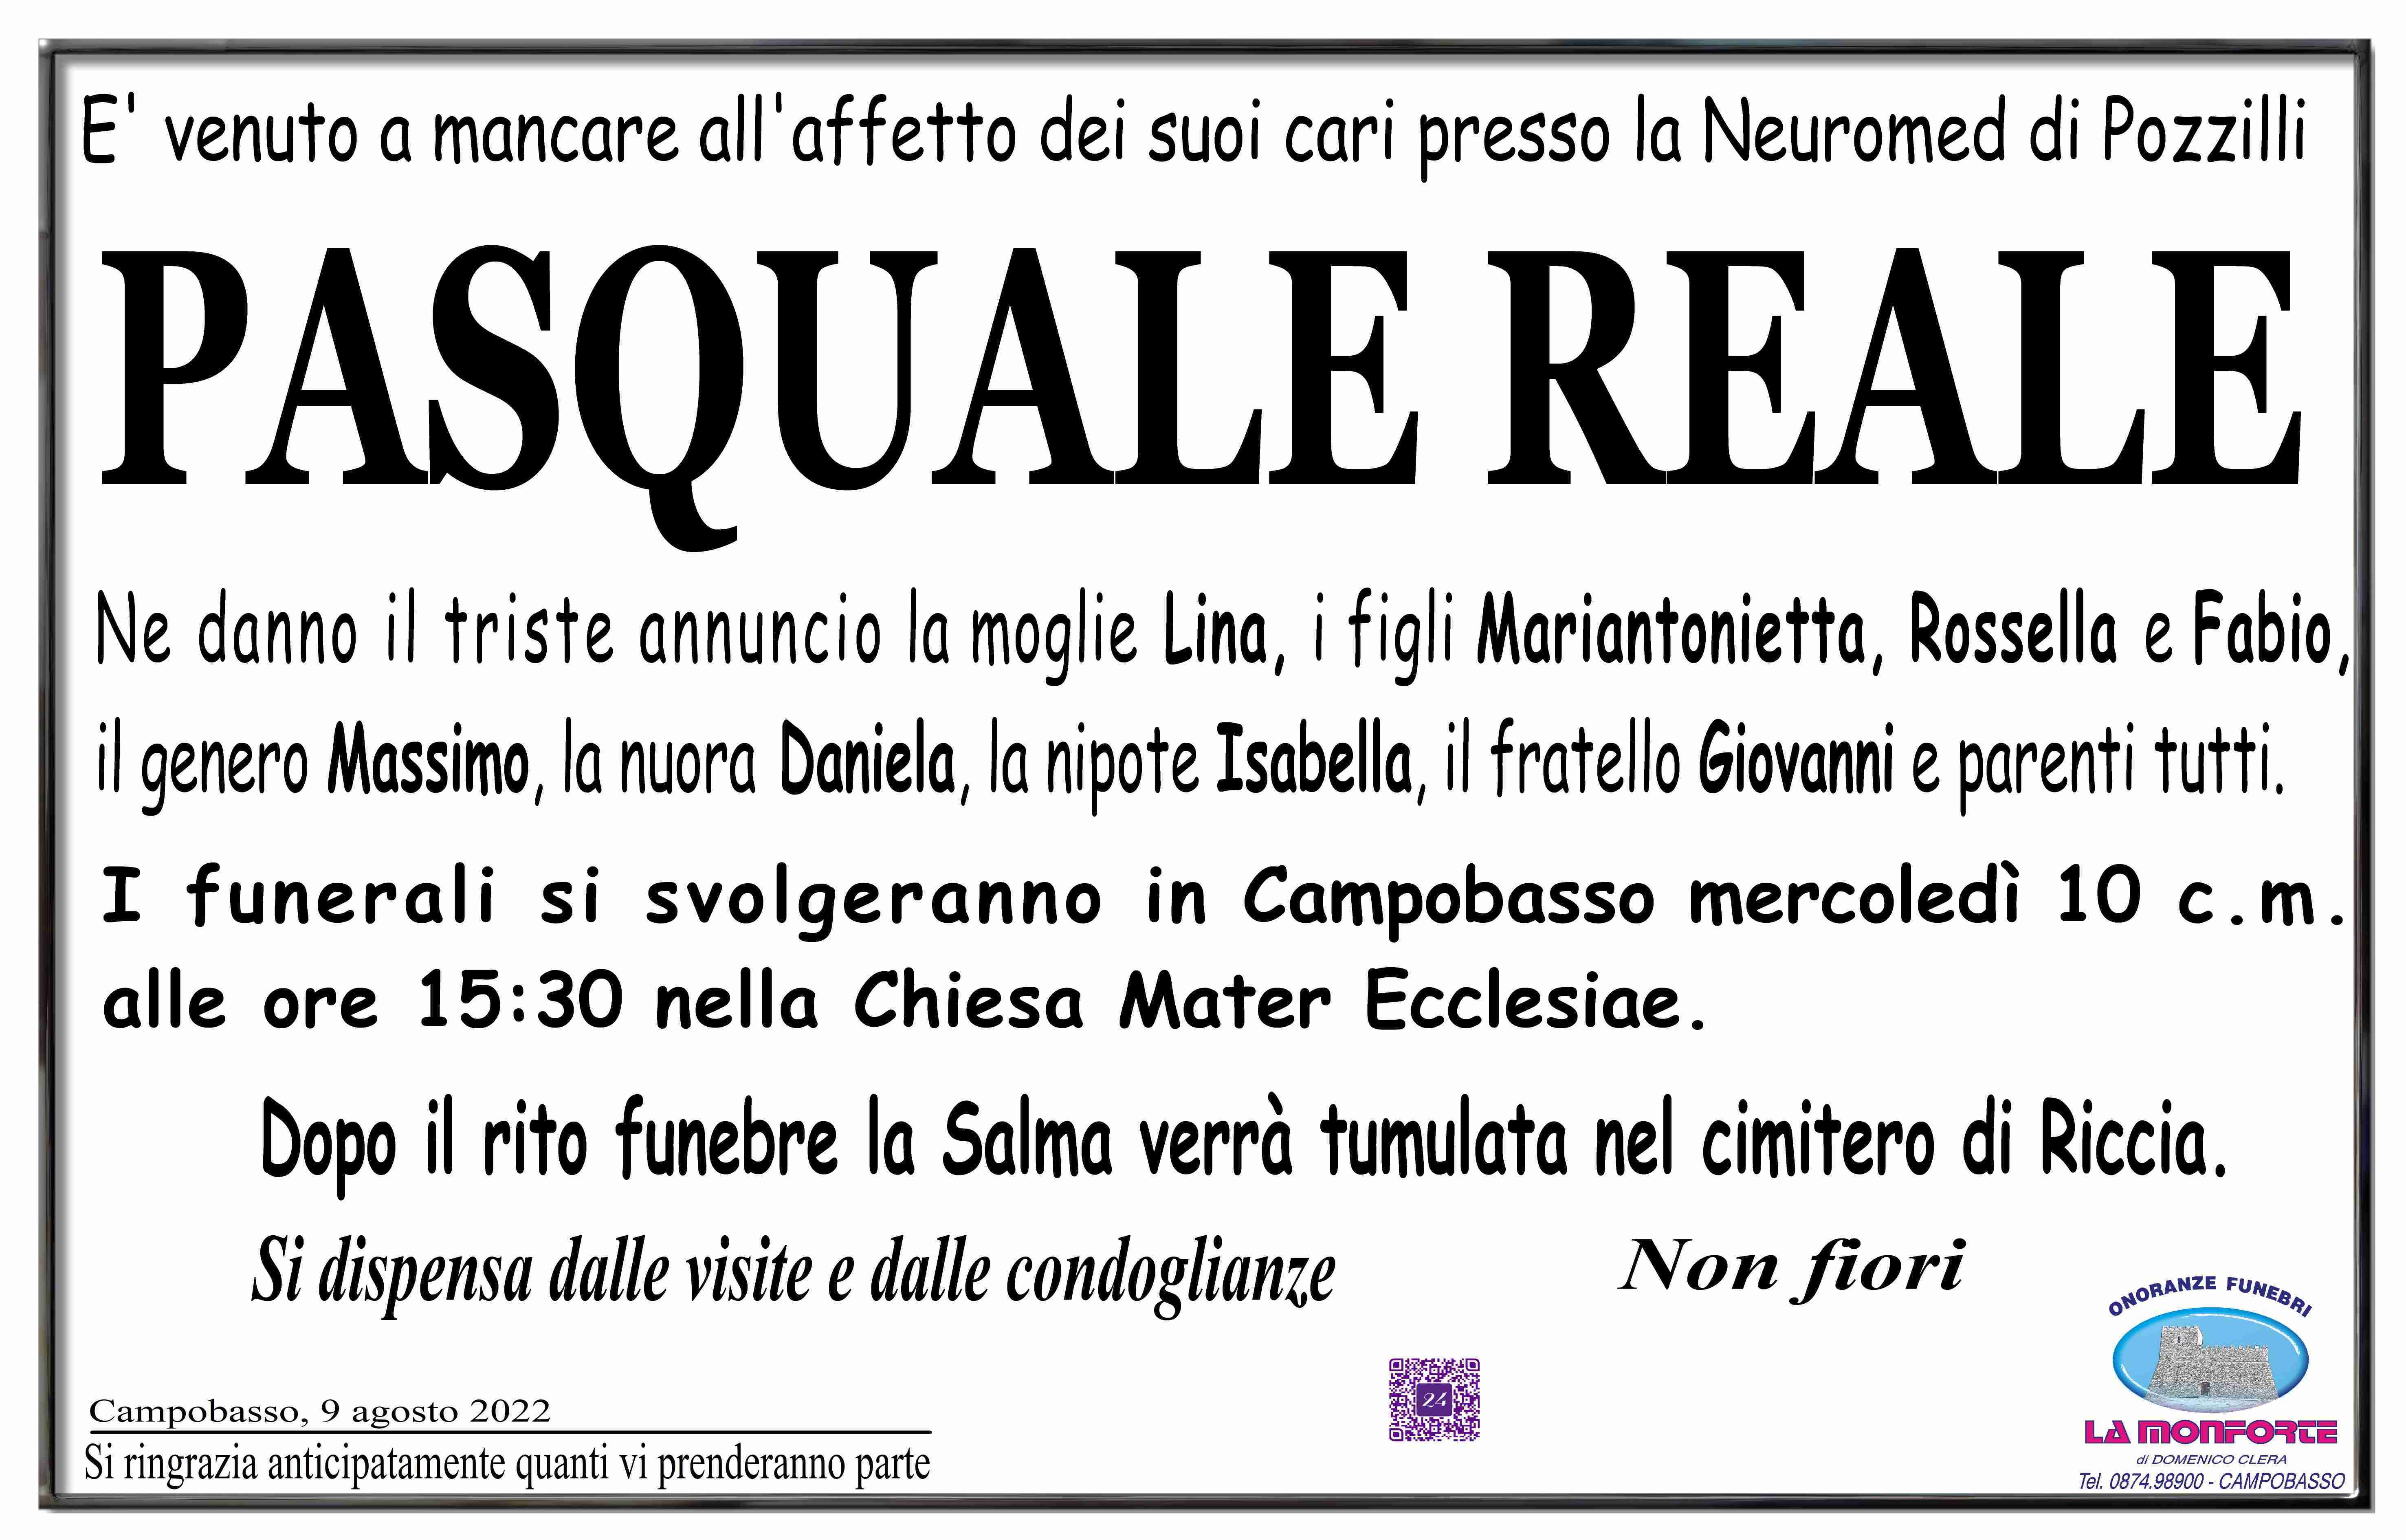 Pasquale Reale